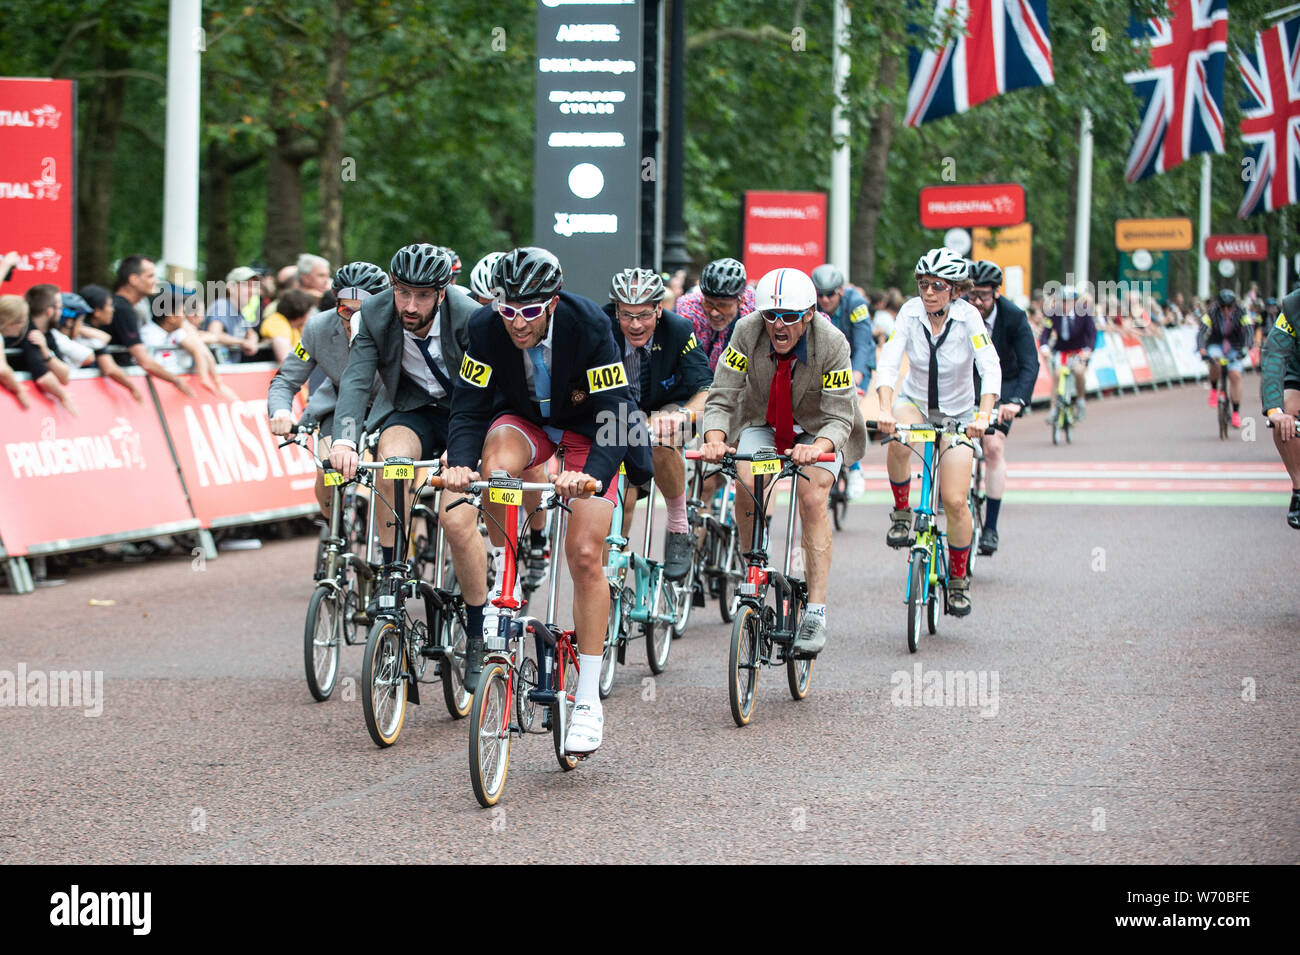 London, UK. 3 August 2019. People take part in the 14th Brompton World Championship Final, part of Prudential RideLondon, riding a 1.3km circuit around St James's Park. Credit: Quan Van/ Alamy Live News Stock Photo